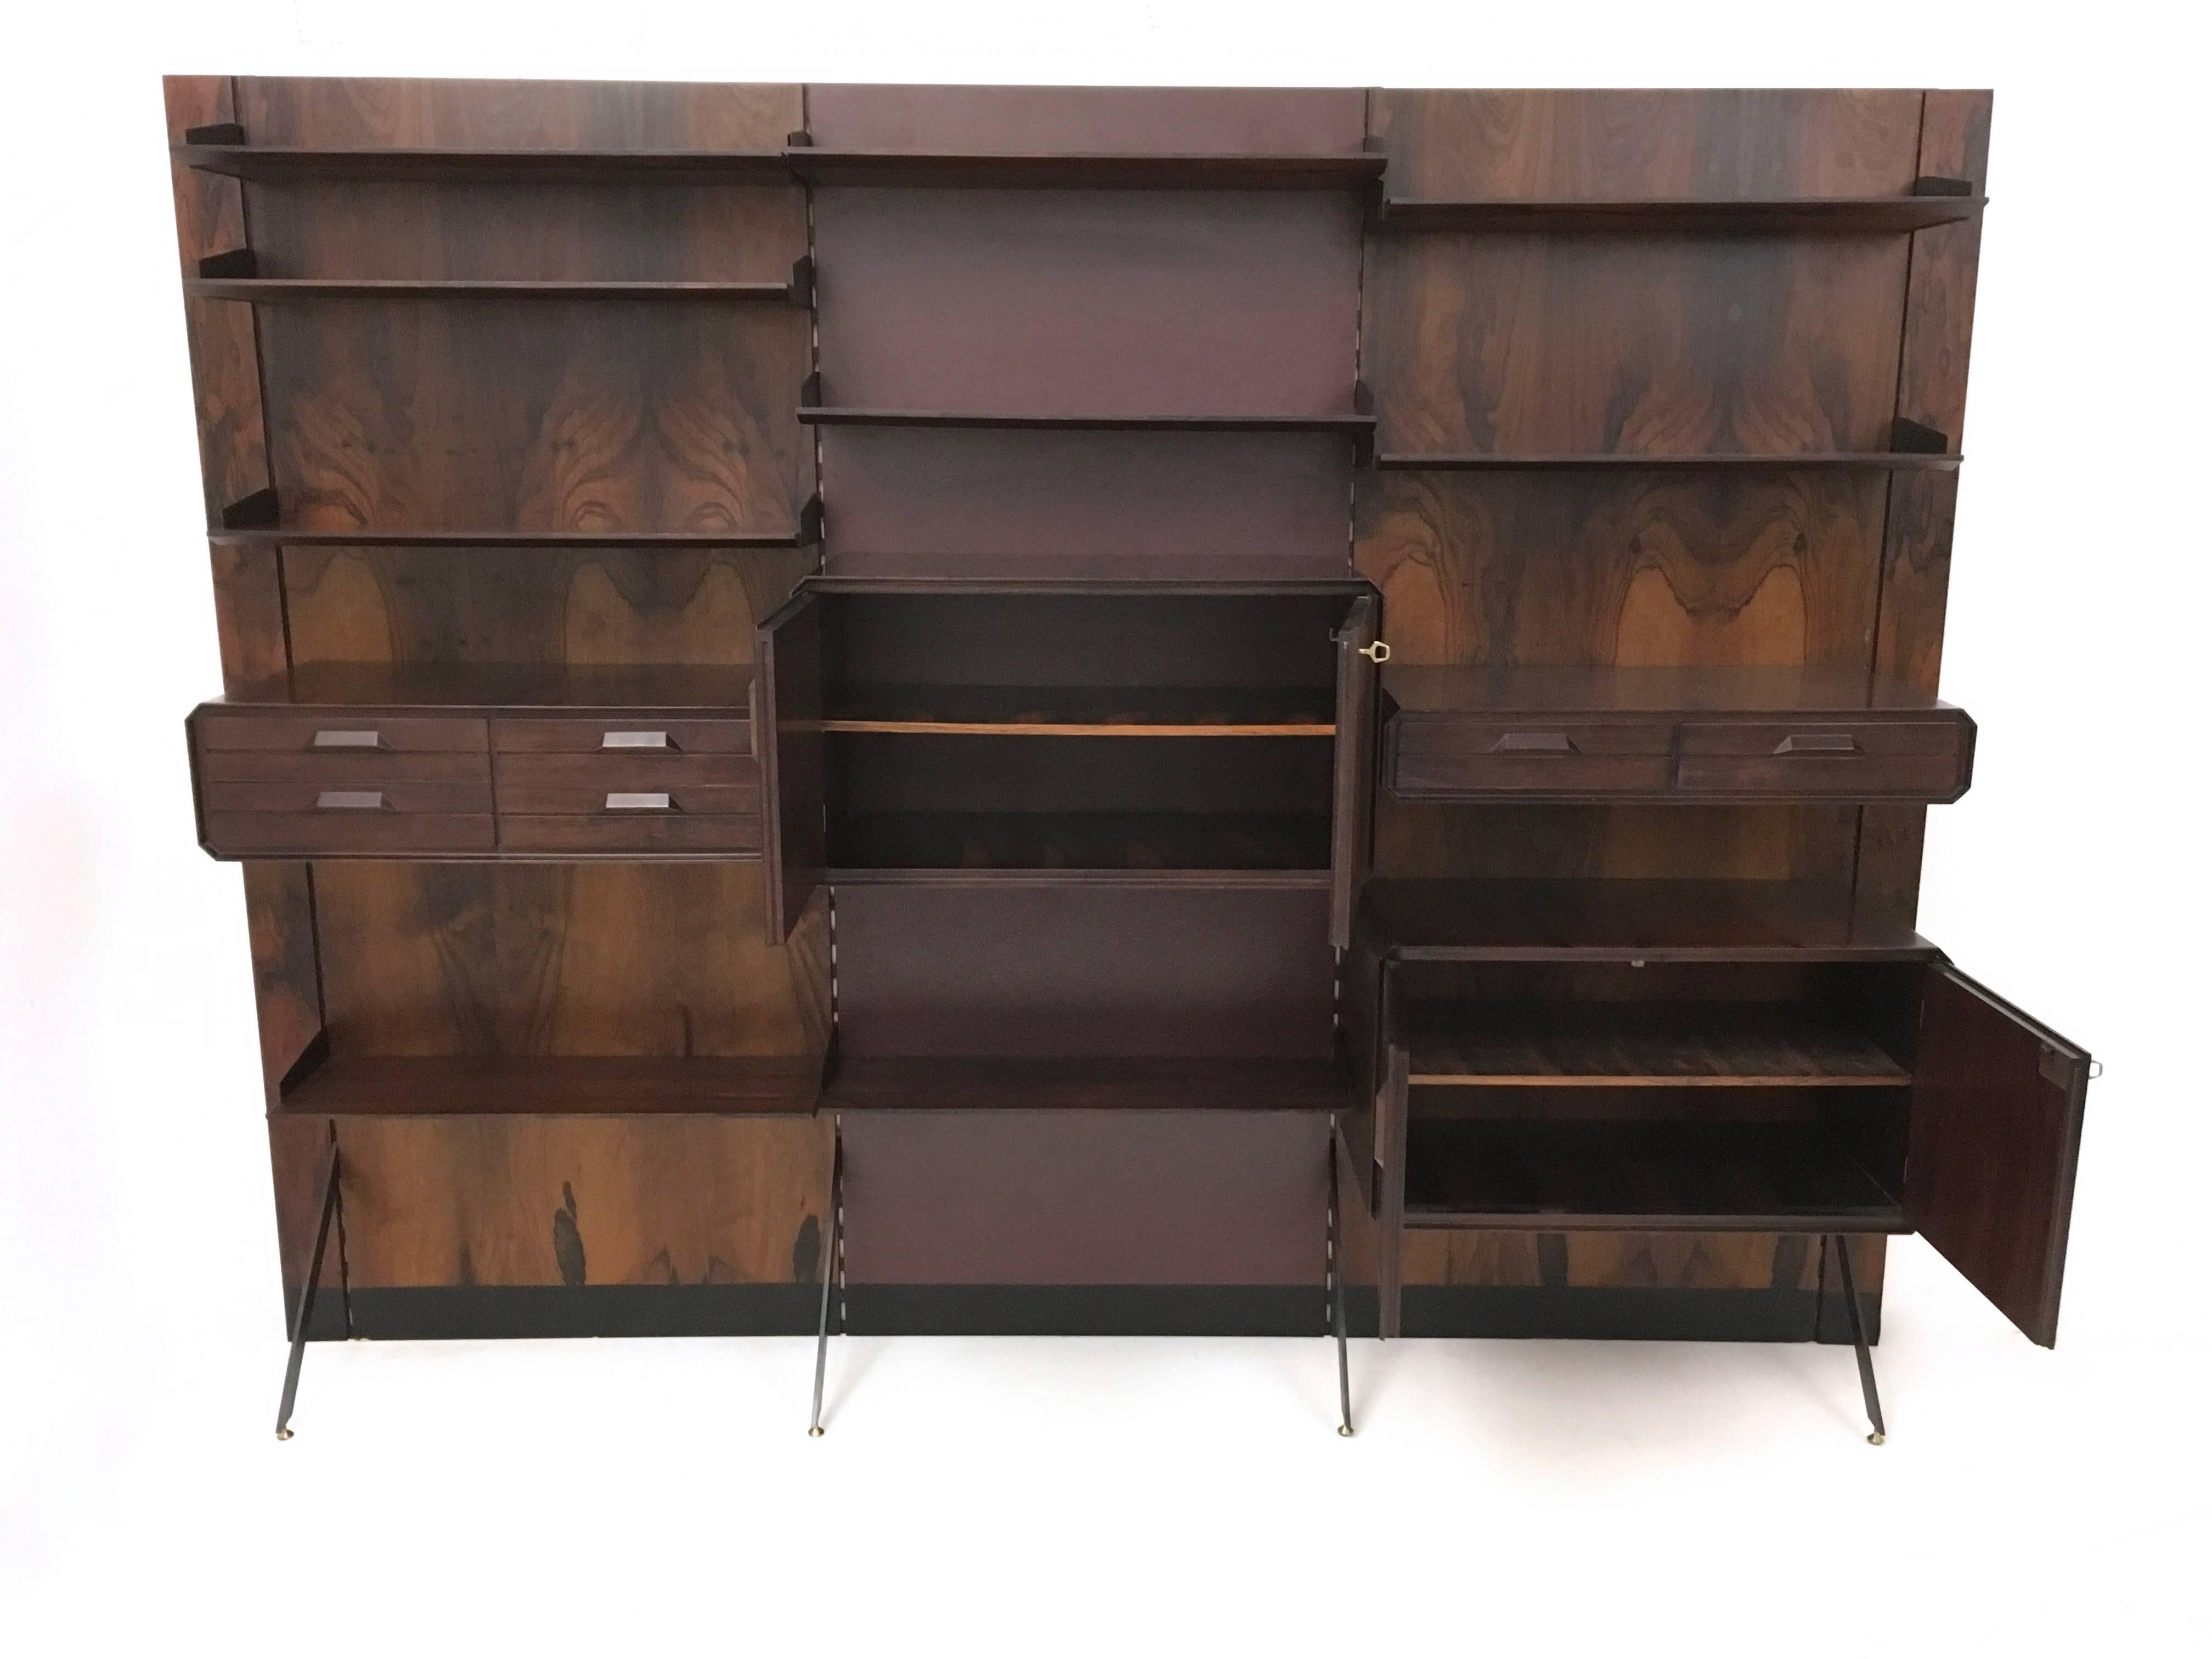 Italian Midcentury Modern Wood, Formica, Metal and Brass Bookcase, Italy, 1960s